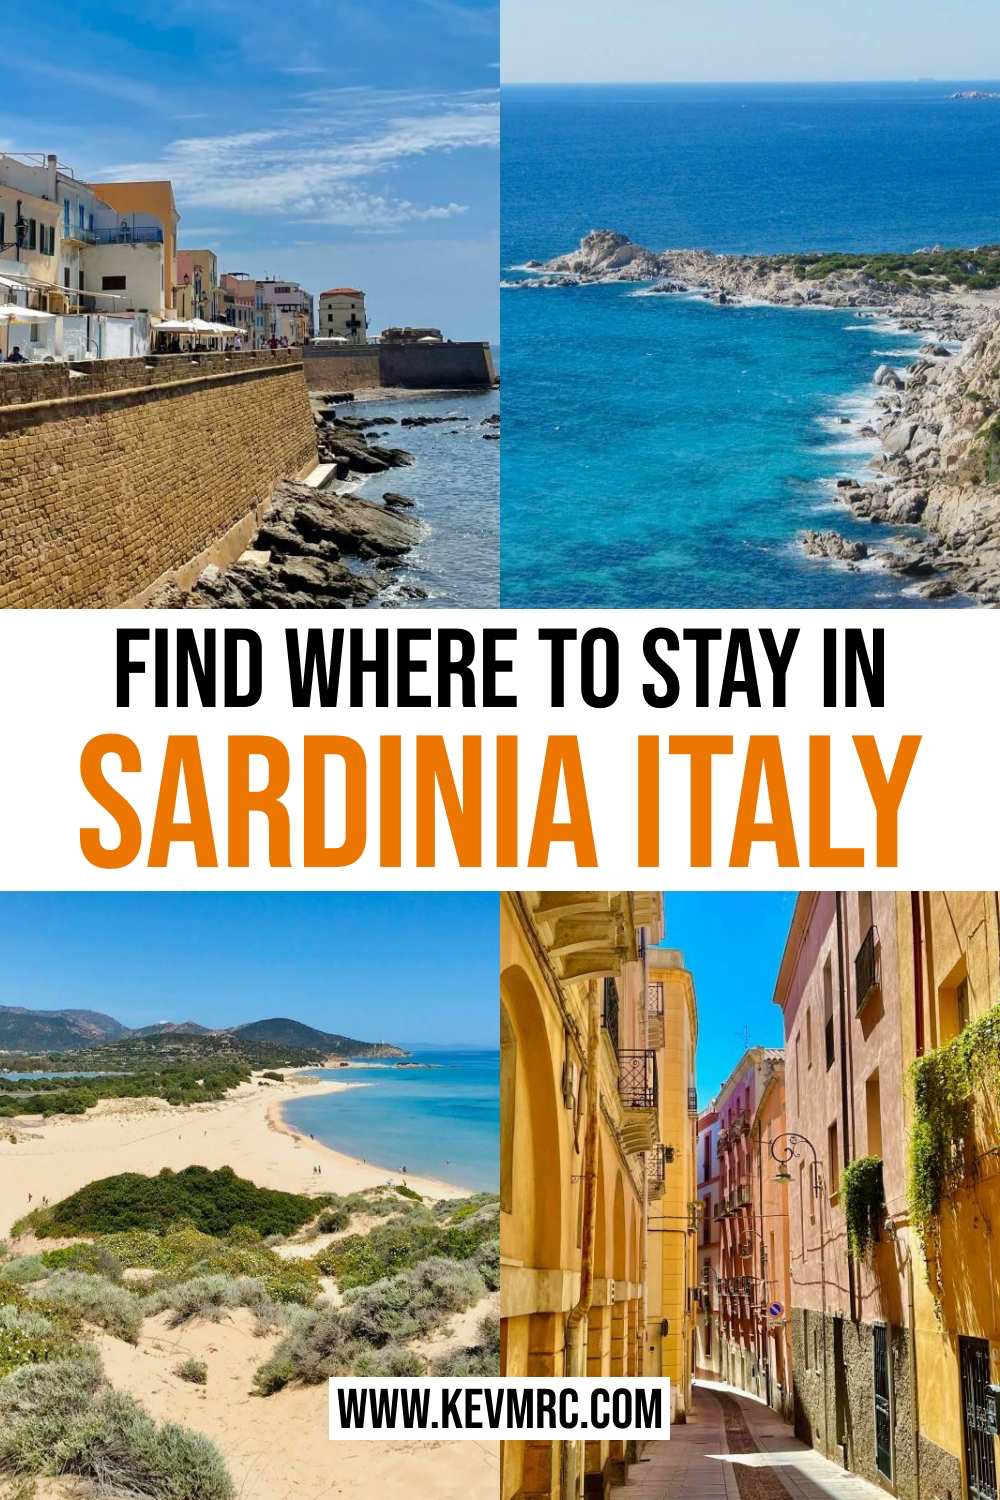 Planning a trip to Sardinia but don't know where to stay? Here are the best places to stay in Sardinia Italy according to your travel style and with pros & cons for each area. Plus hotel options! where to stay in sardinia italy | sardinia travel